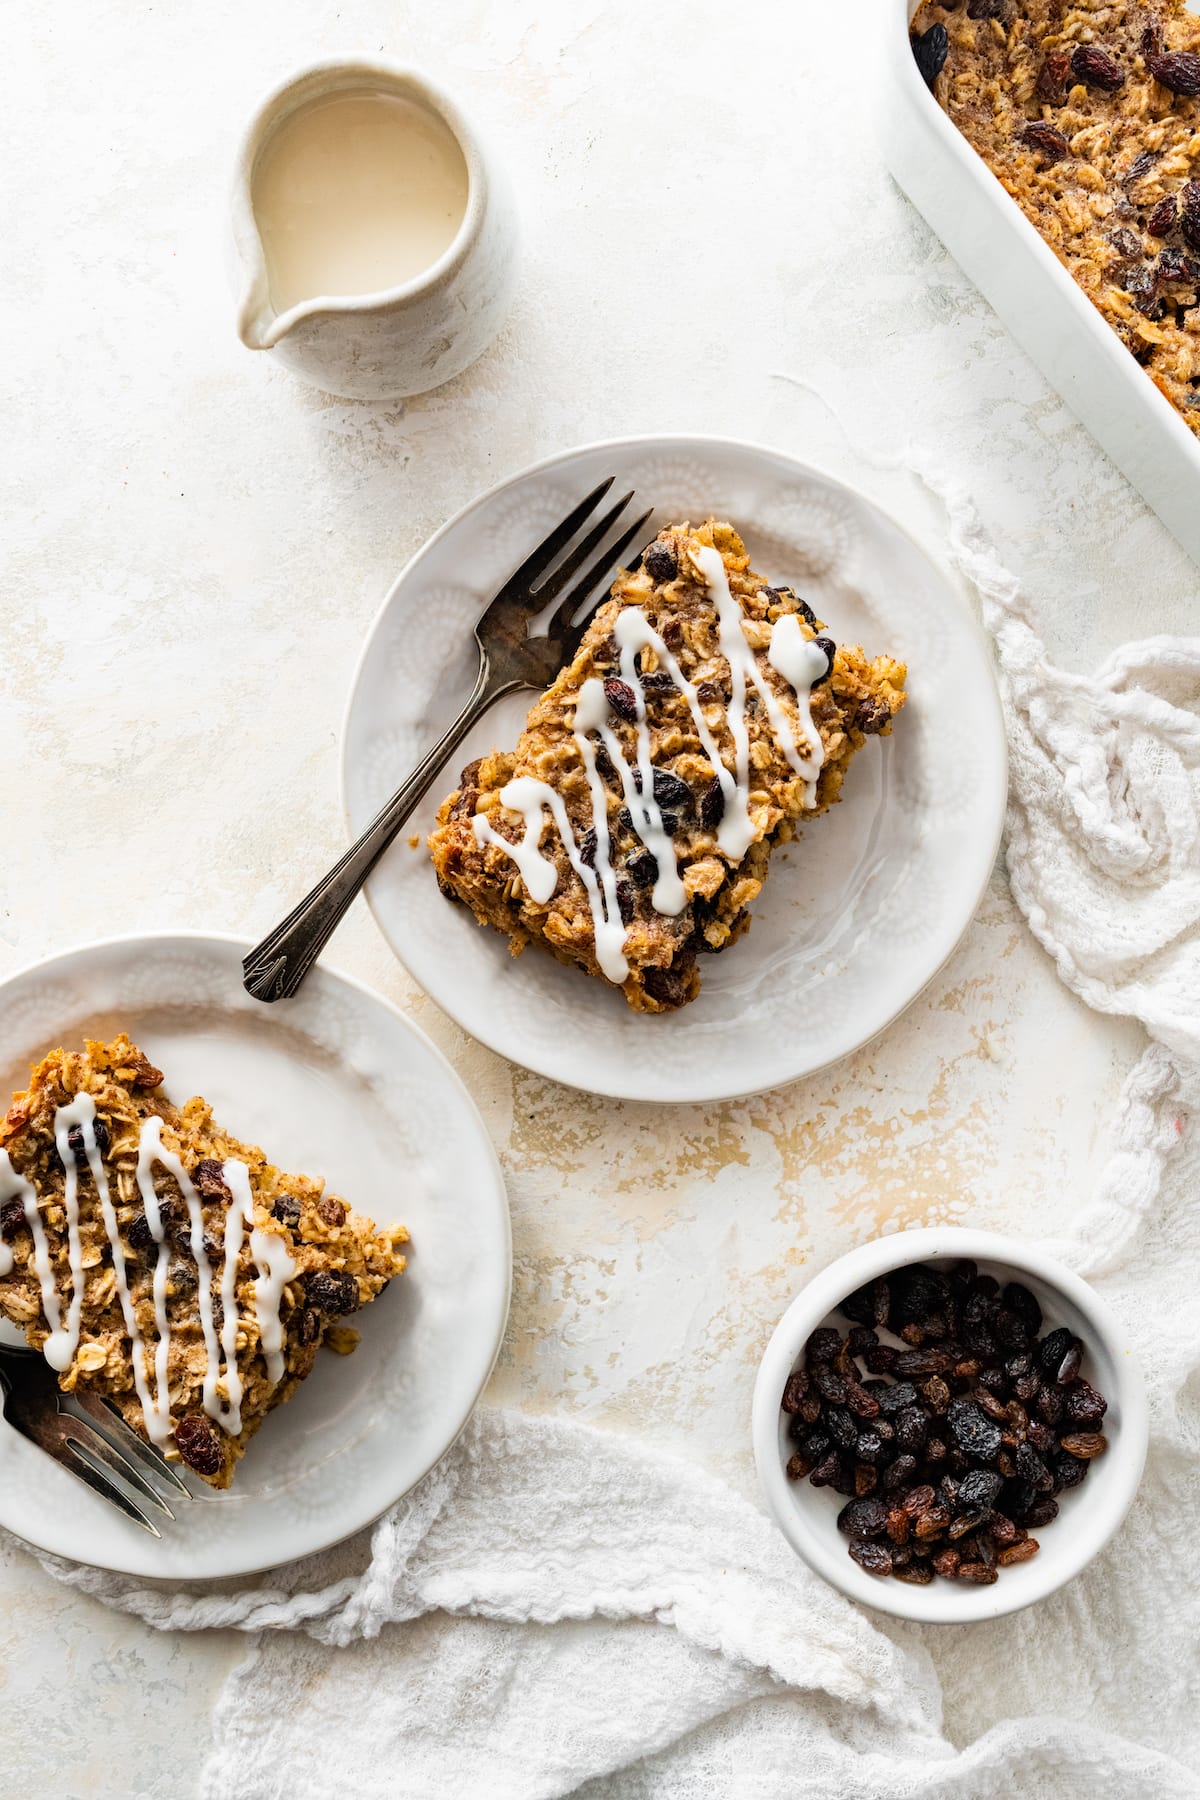 Two servings of cinnamon raisin baked oatmeal on small plates with a drizzle of coconut butter on top.